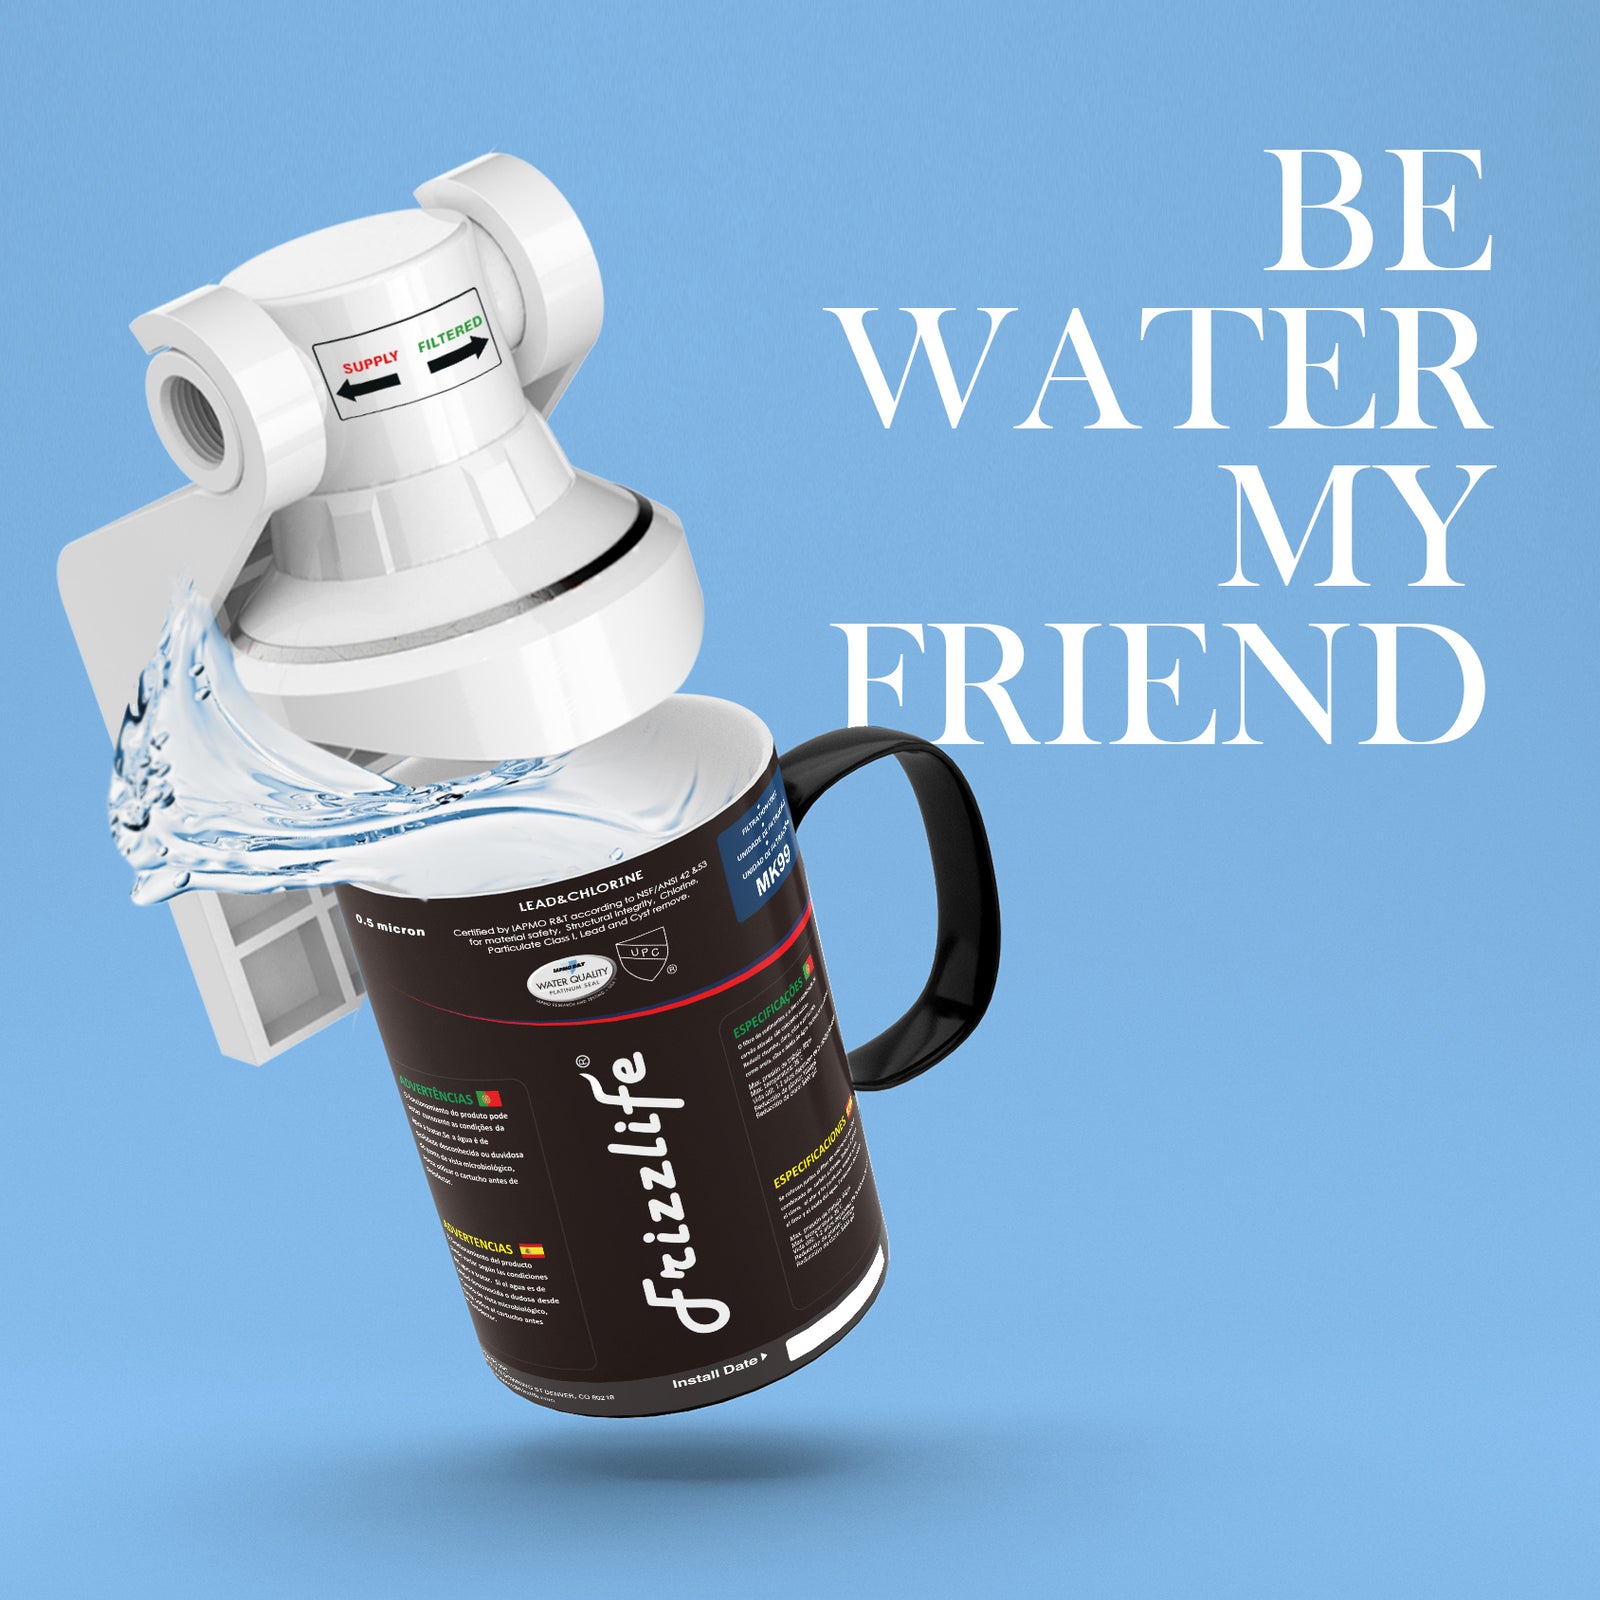 Be Water! My Friend. --- Frizzlife Water Filter Solutions